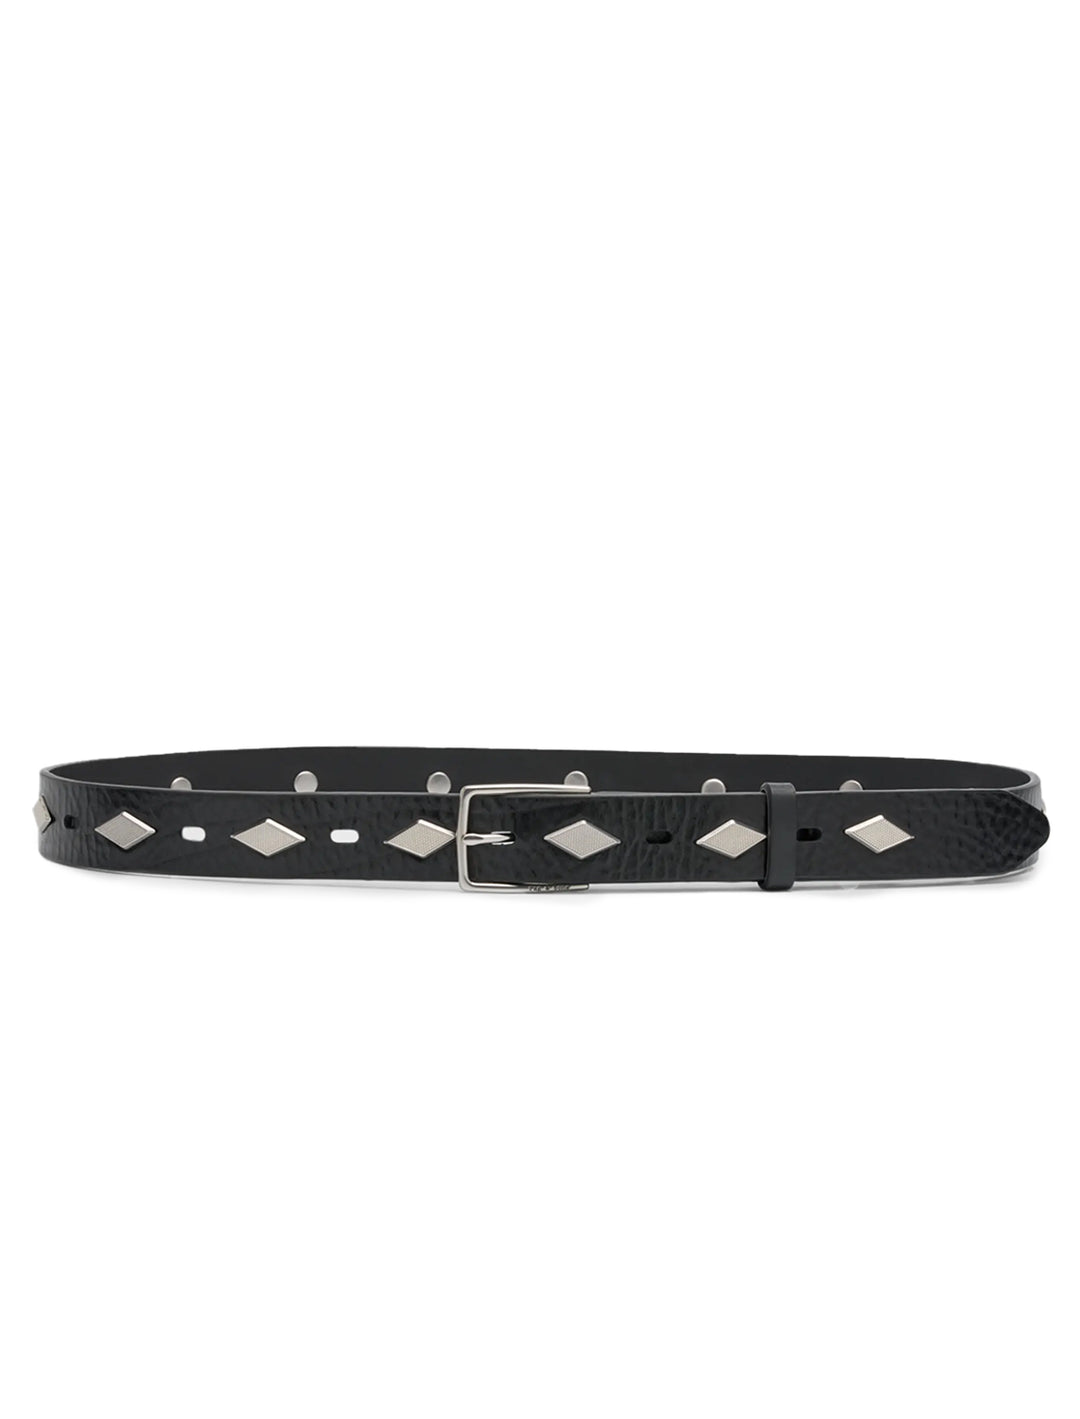 Front view of Rag & Bone's colin studded belt in black.